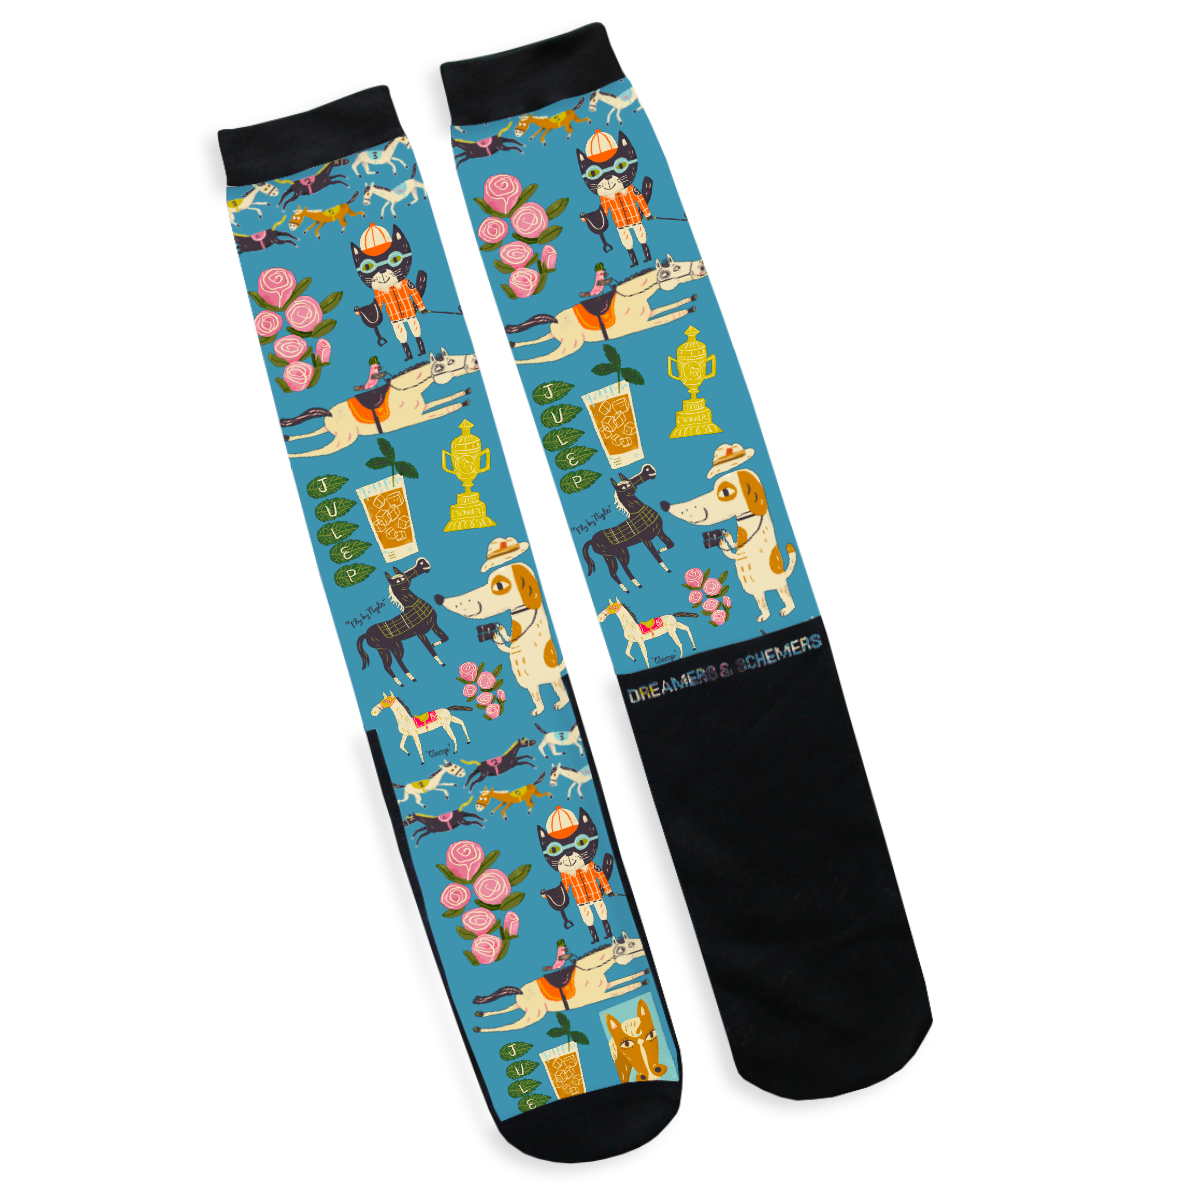 Off To The Races - Dreamers and Schemers Socks